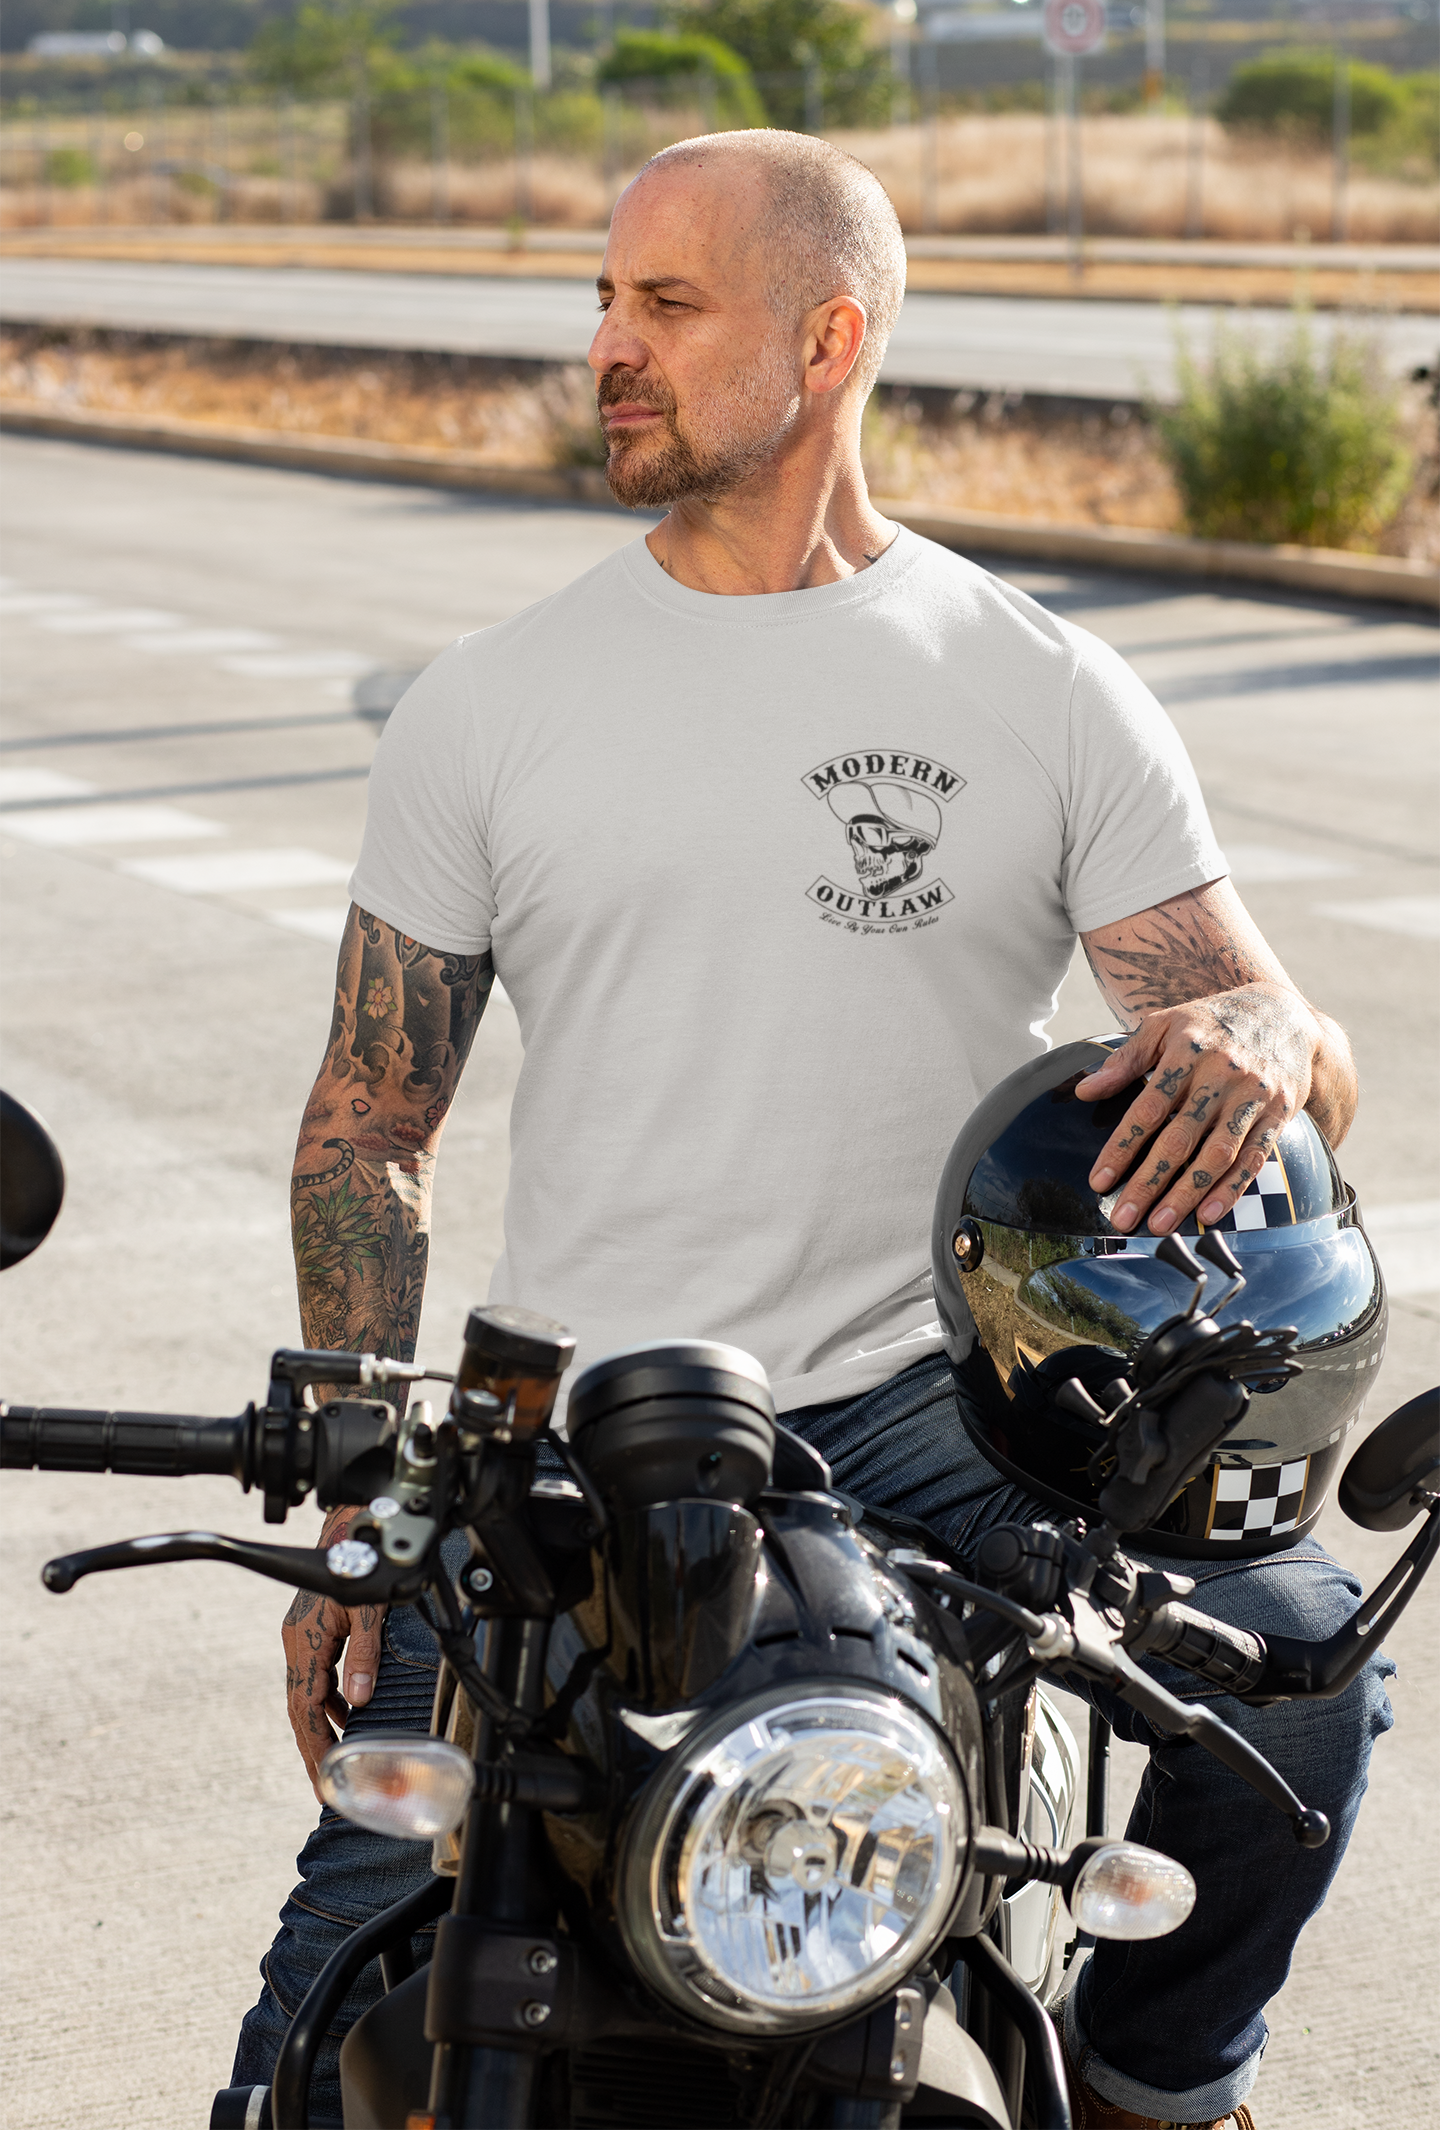 Modern Outlaw - Live by Your Own Rules - Dry Fit Short Sleeve Light Gray Shirt